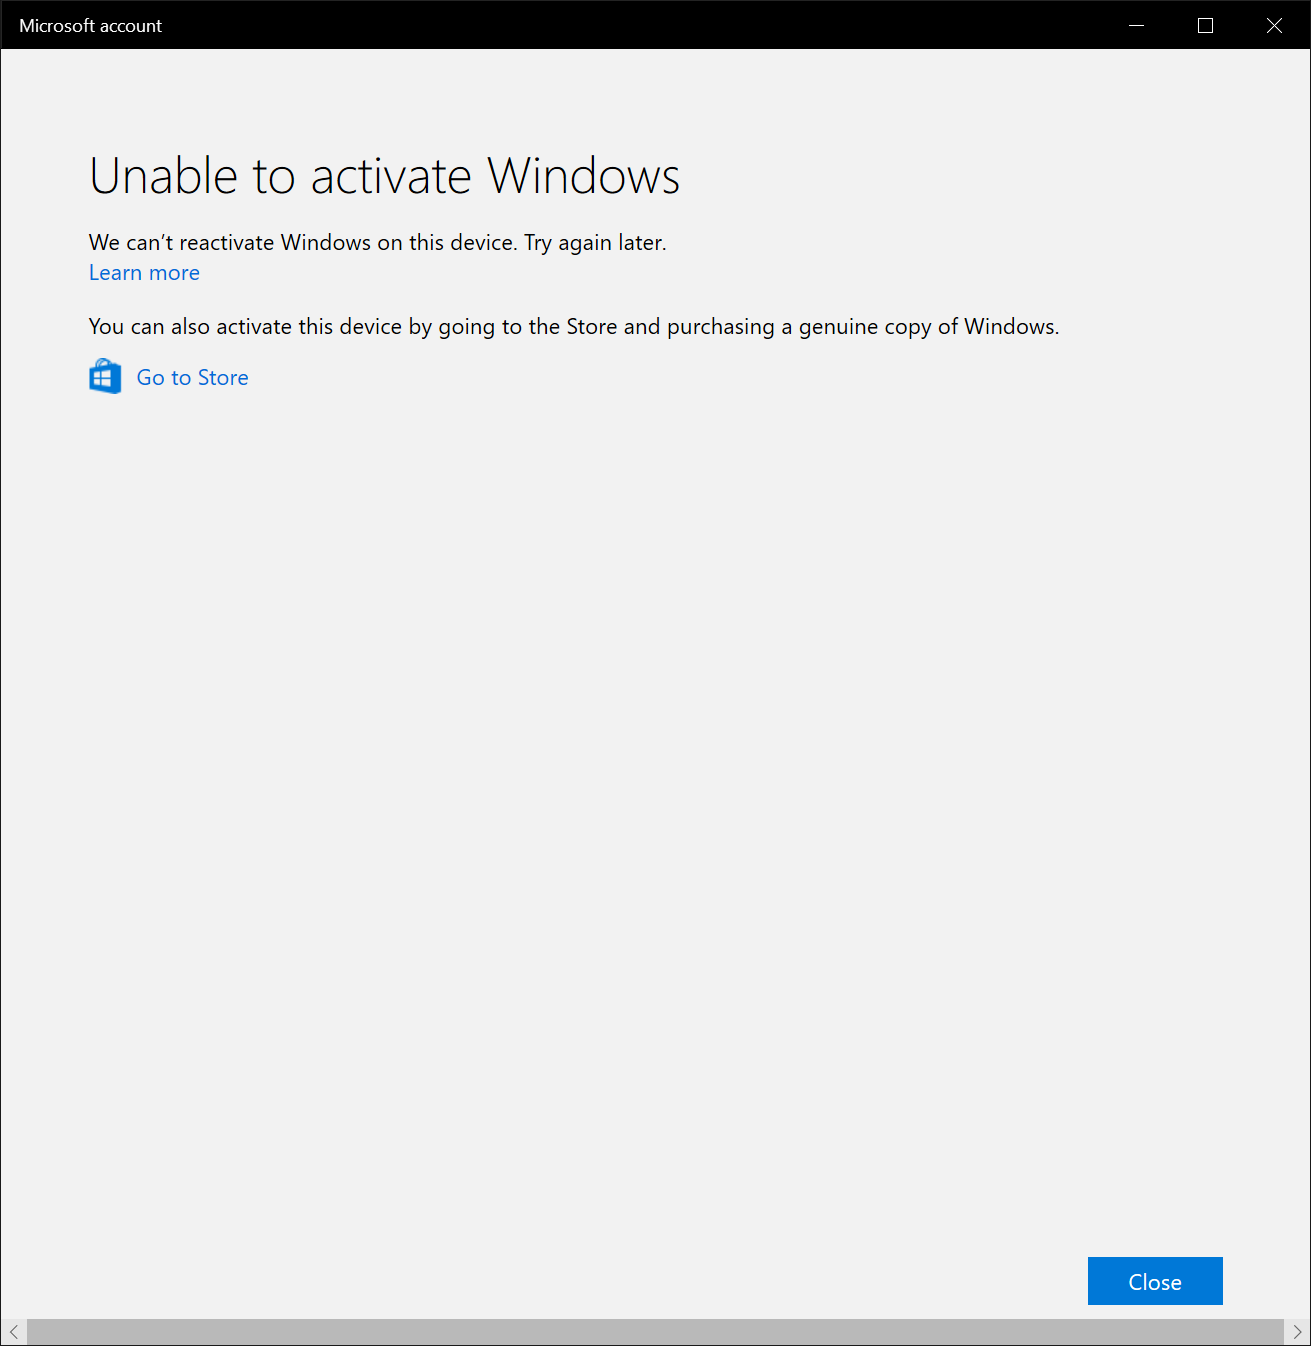 Windows 10 fails to activate after hardware change 8be6a75e-b97b-4de7-8849-ded9f0a72cf4?upload=true.png